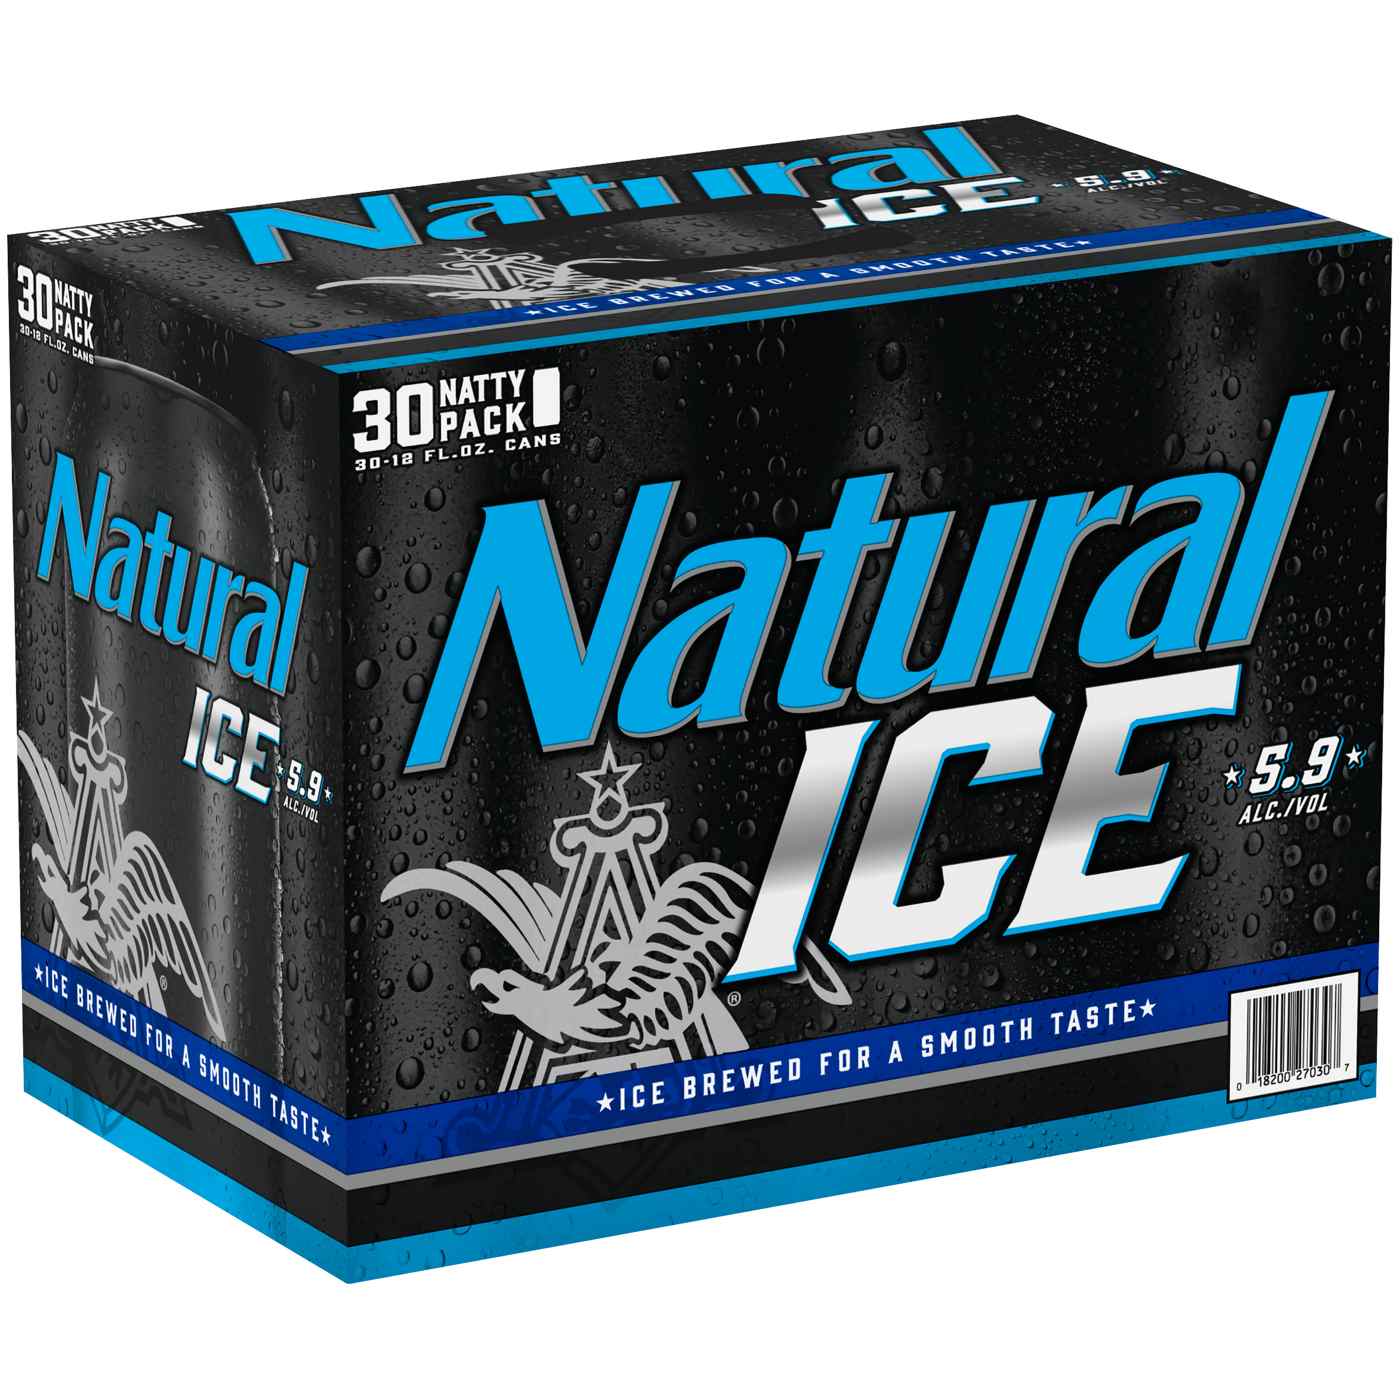 Natural Ice Beer 12 oz Cans; image 1 of 2